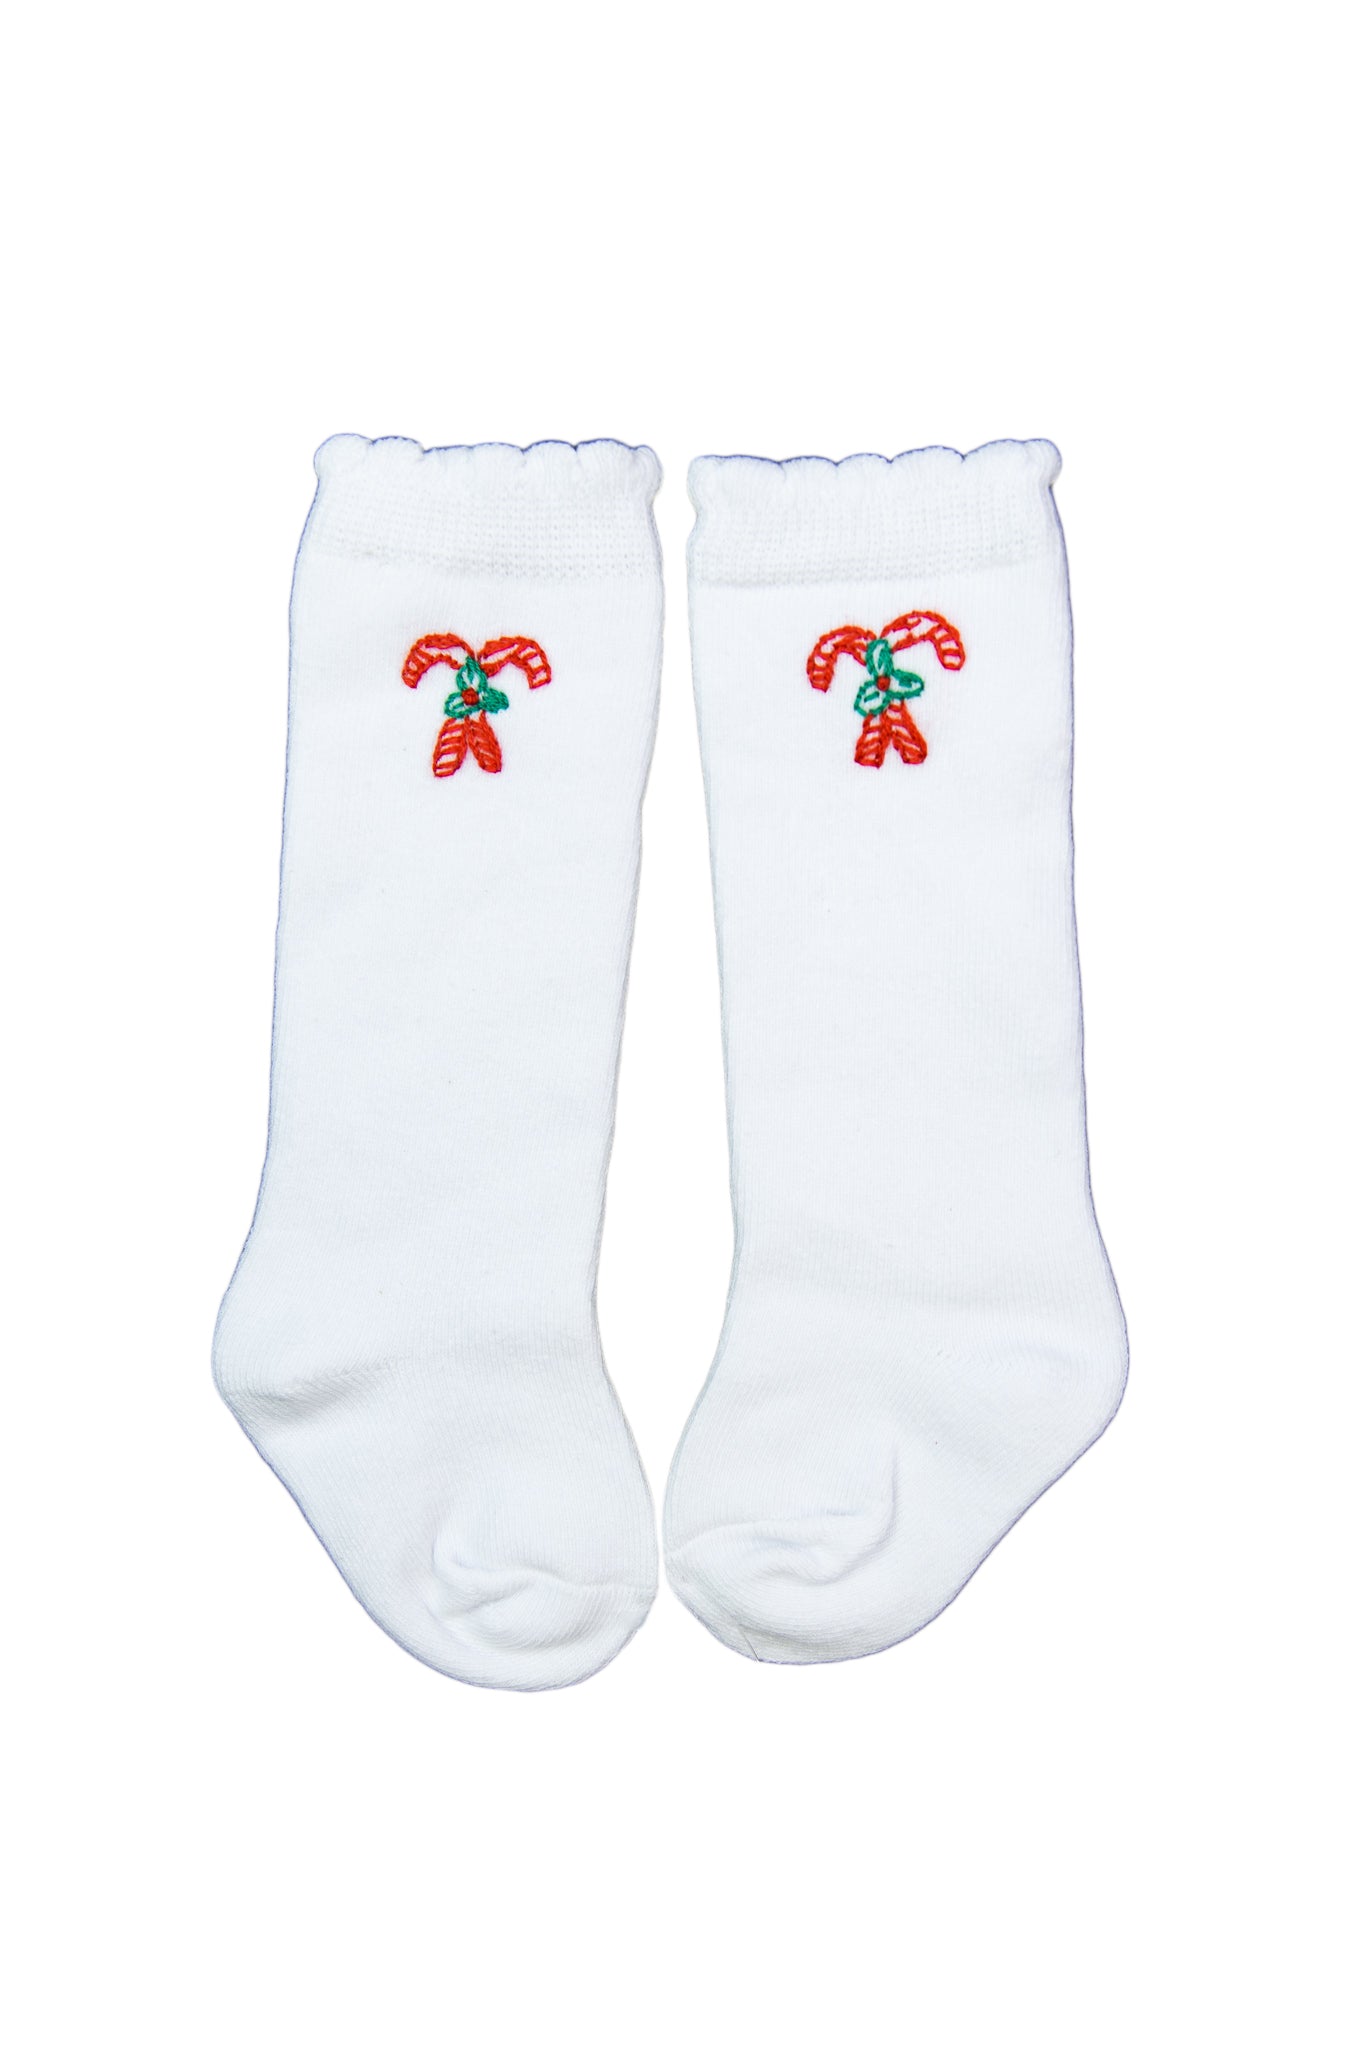 SD Kids Embroidered Candy Cane Socks